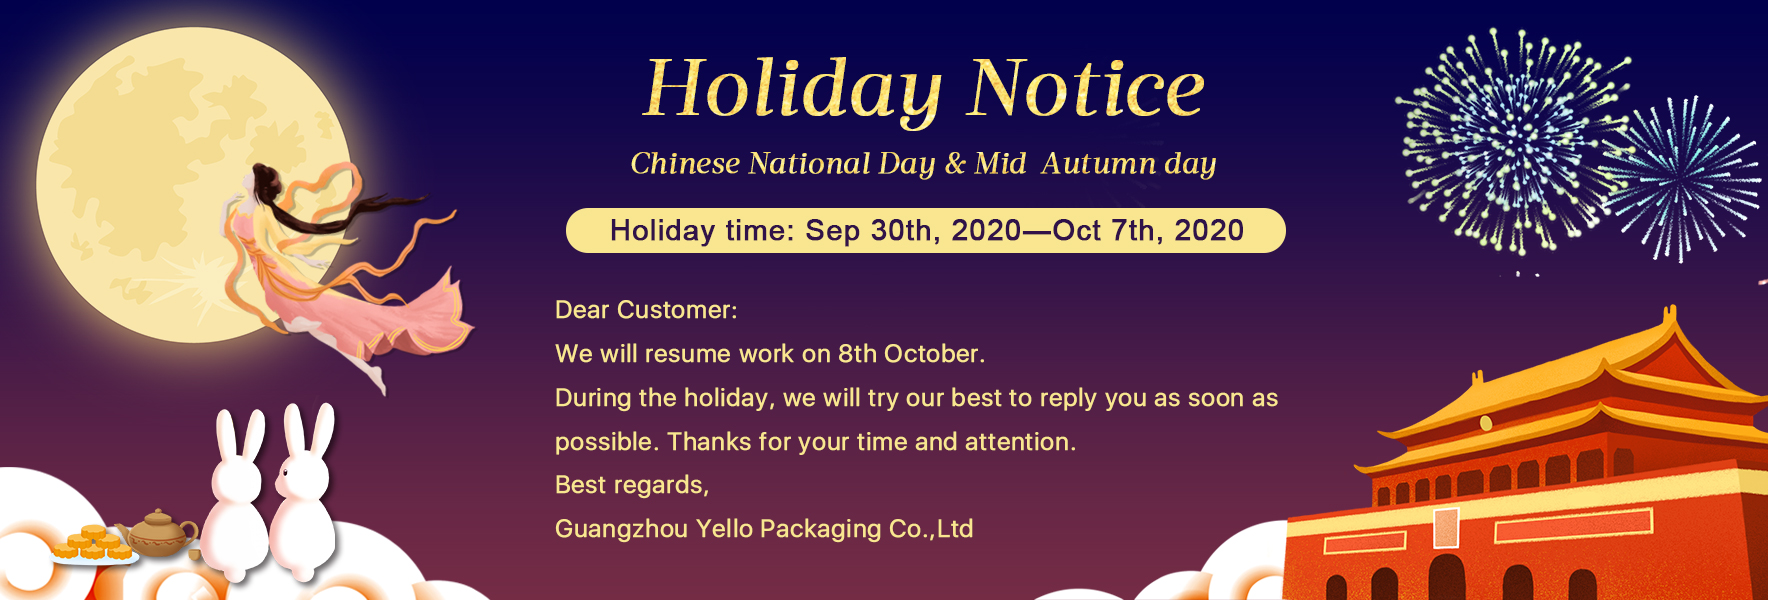 Holiday Notice - Chinese National Day & Mid Autumn Day